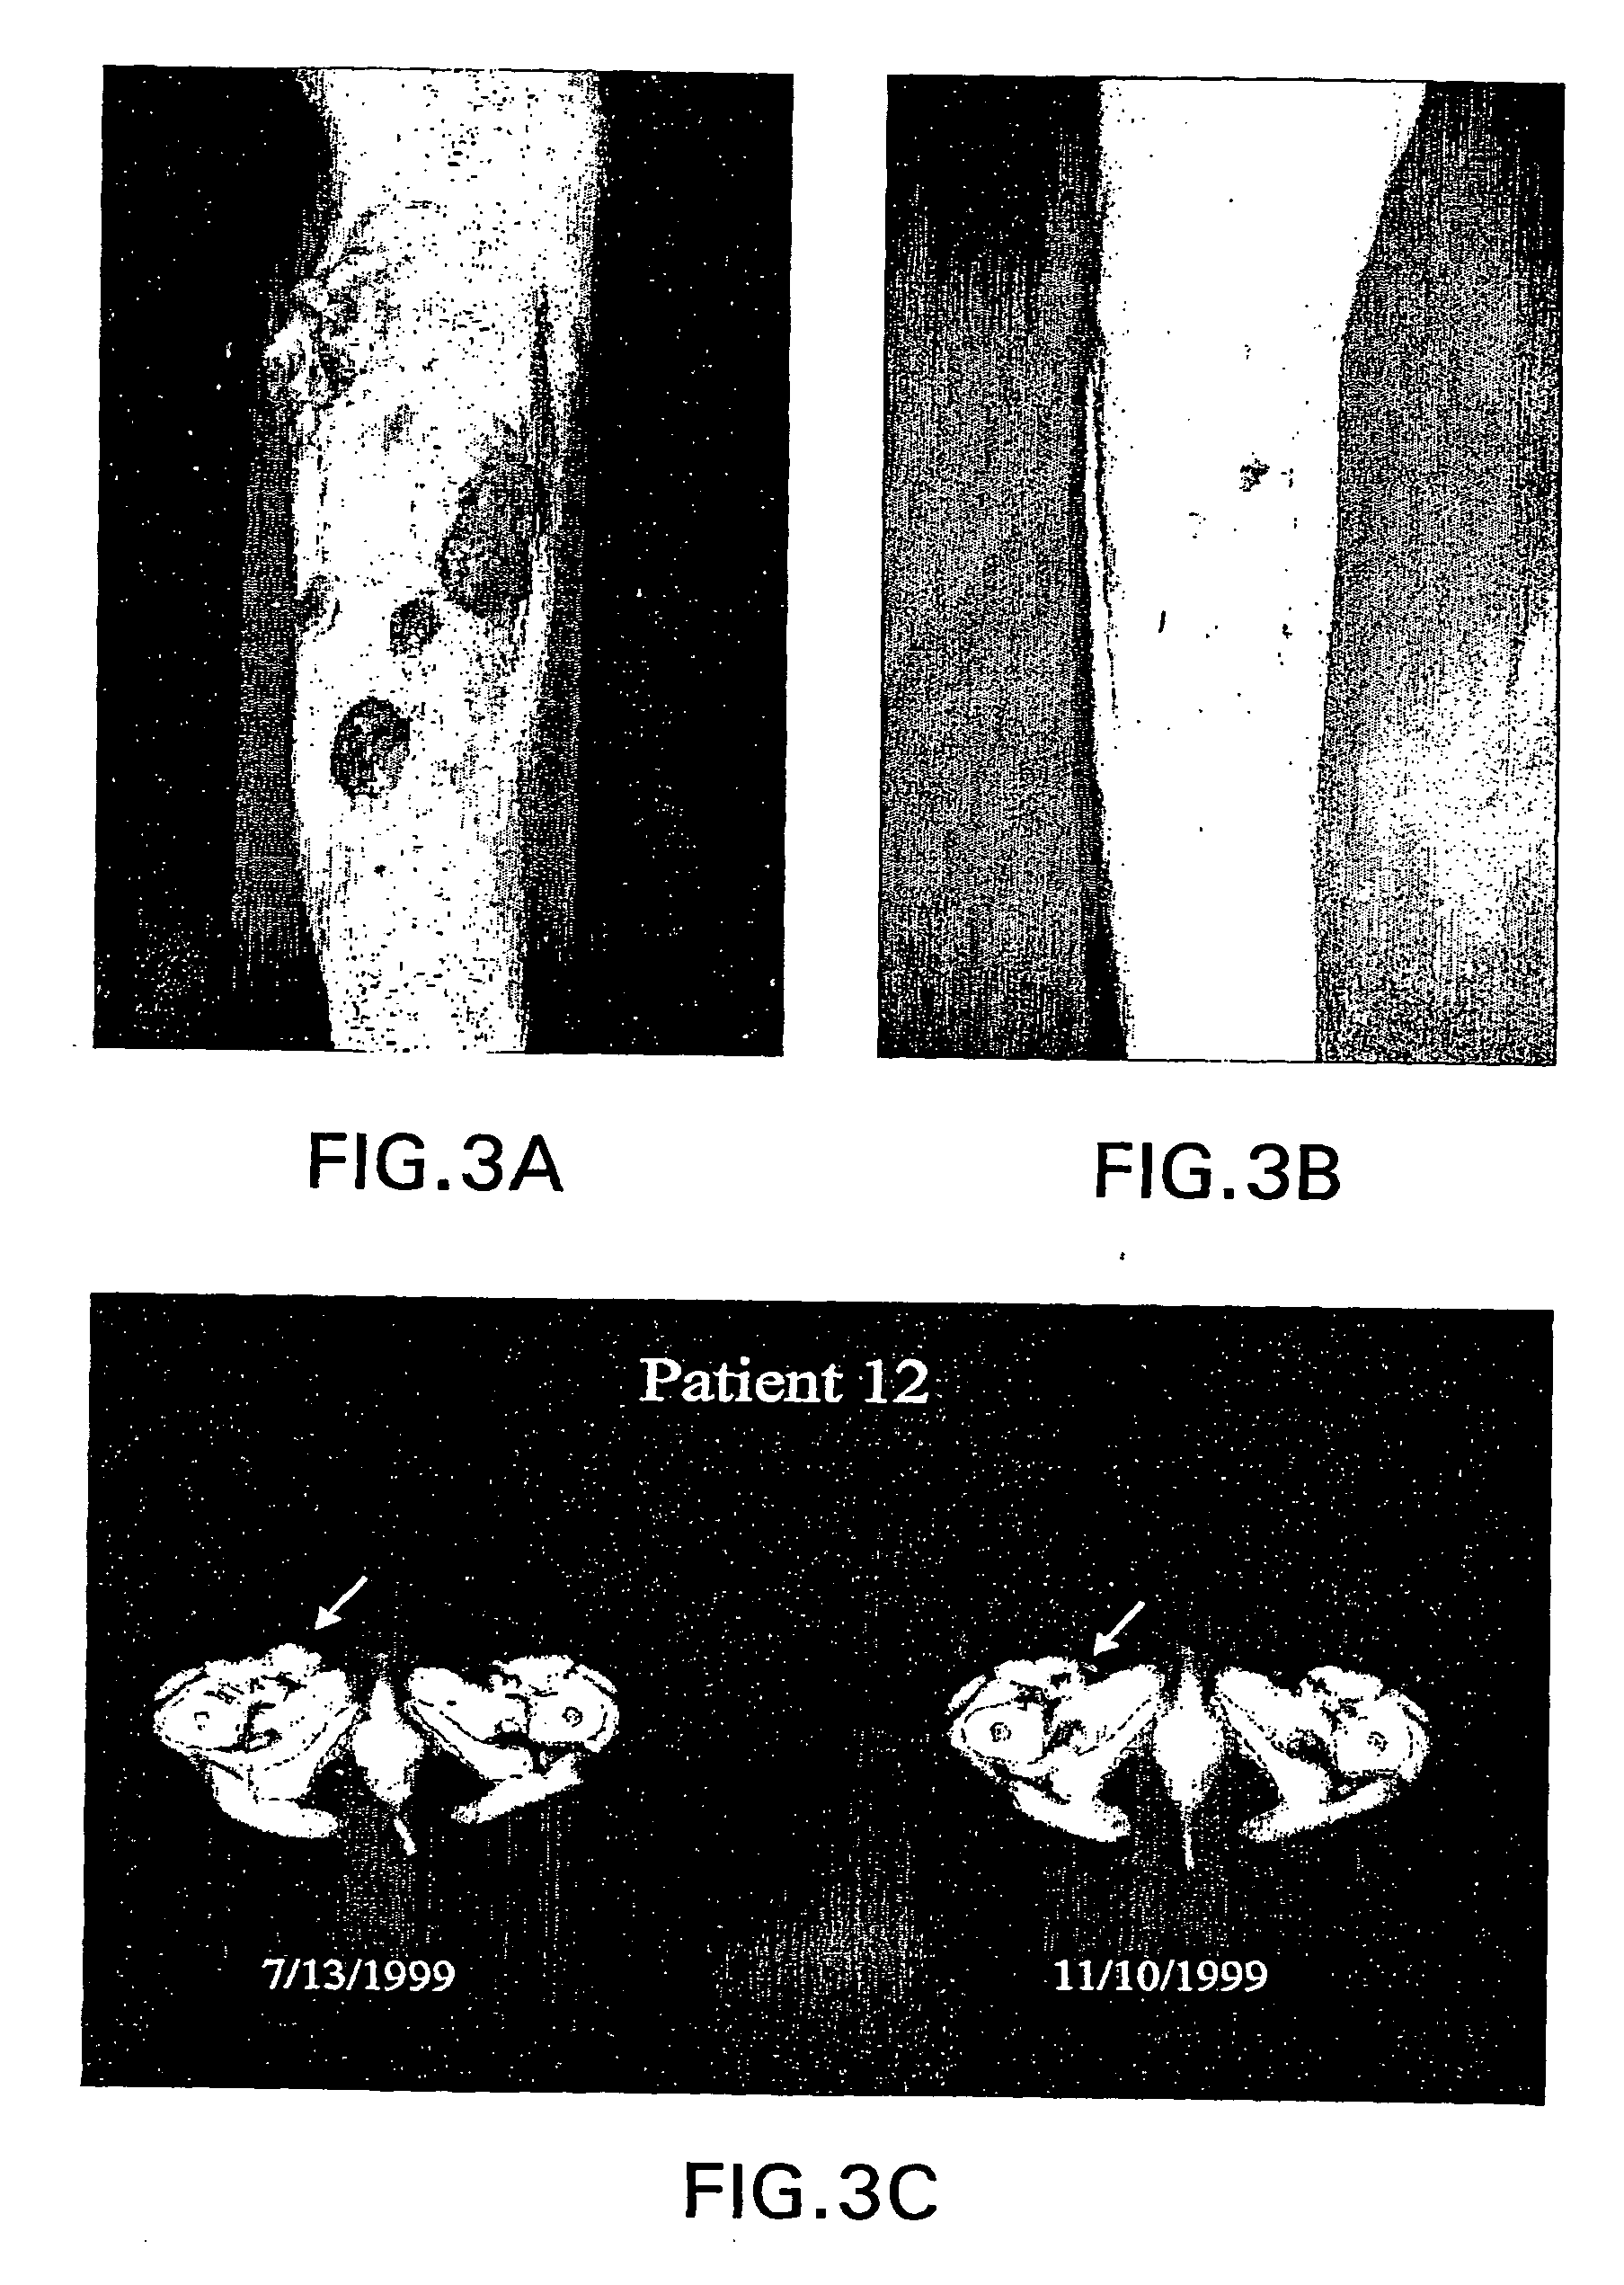 Methods of treatment of a bcl-2 disorder using bcl-2 antisense oligomers